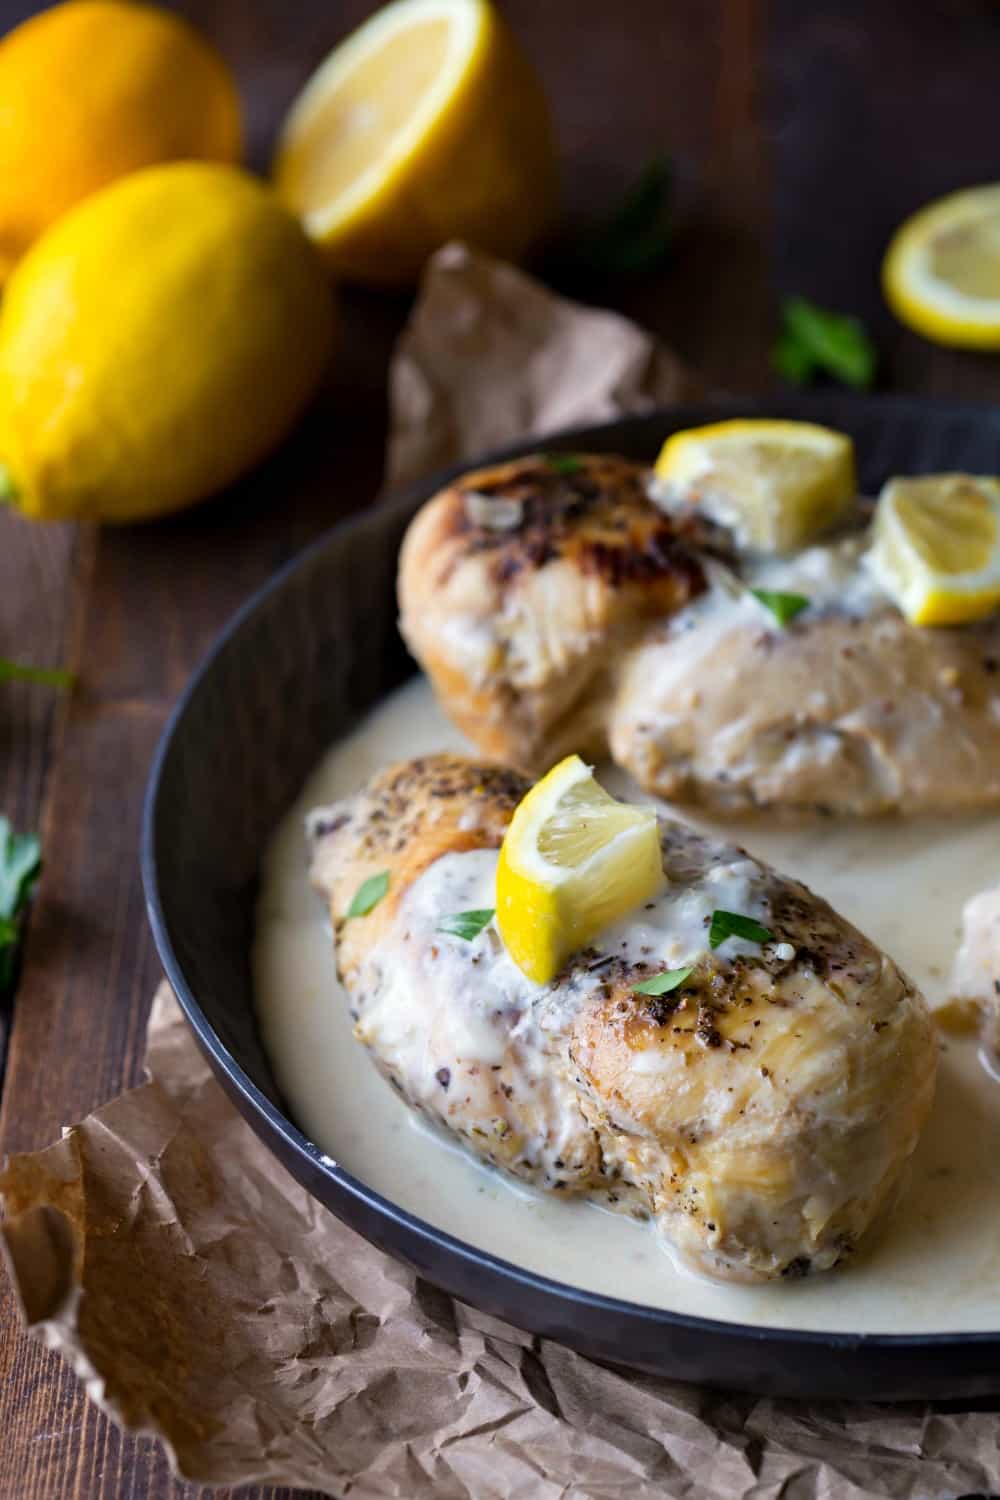 Creamy Crock Pot Chicken topped with fresh lemon slices in a metal dish